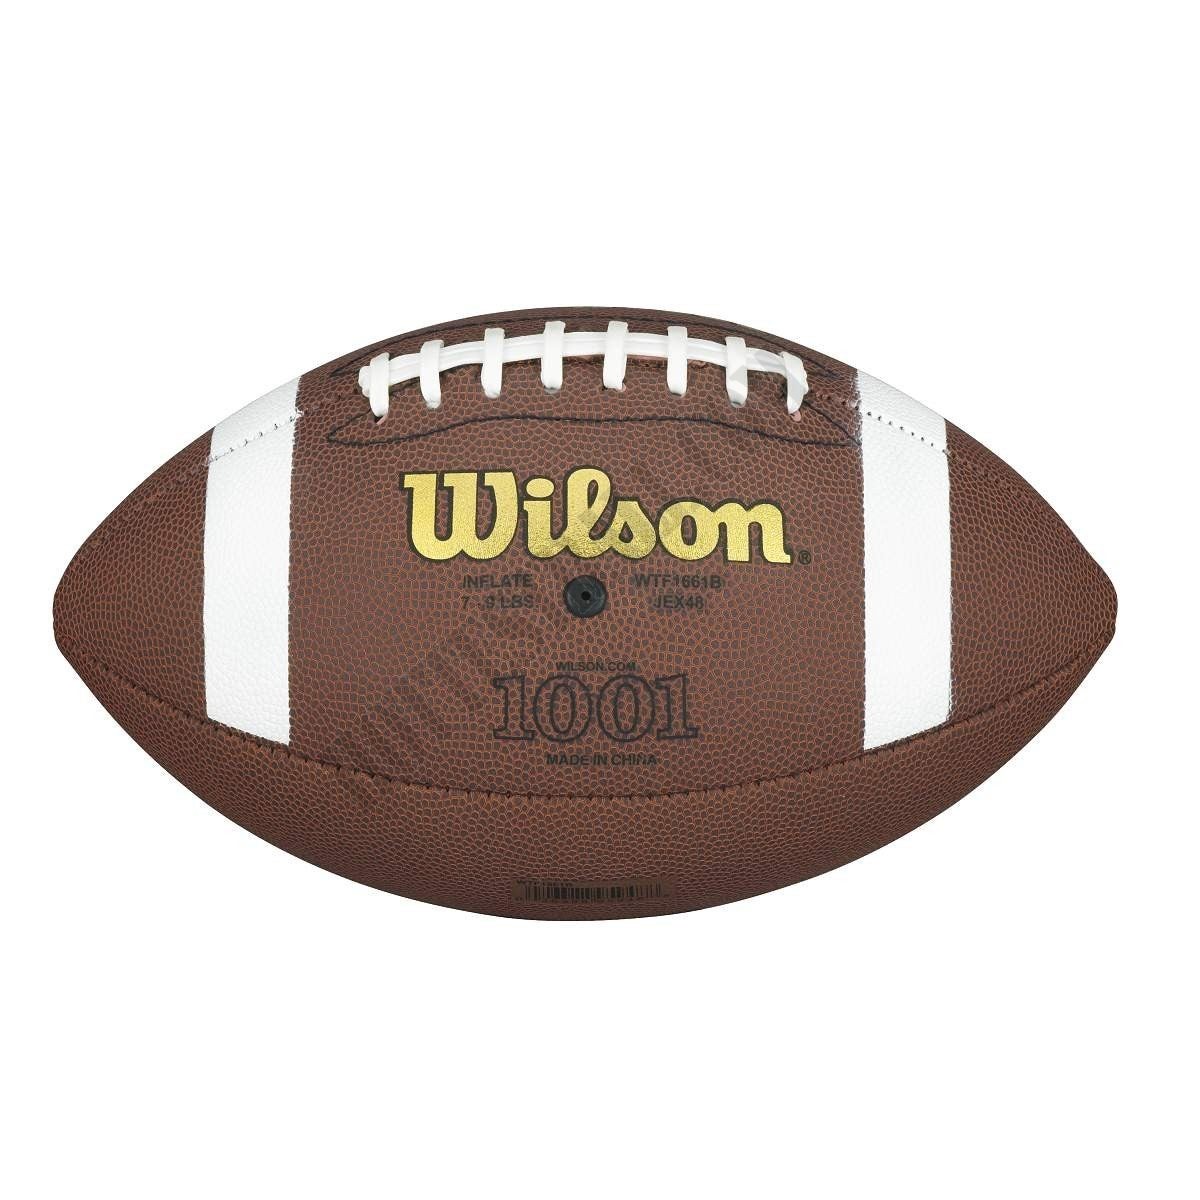 NCAA Official Composite Football - Official (14+) - Wilson Discount Store - -1